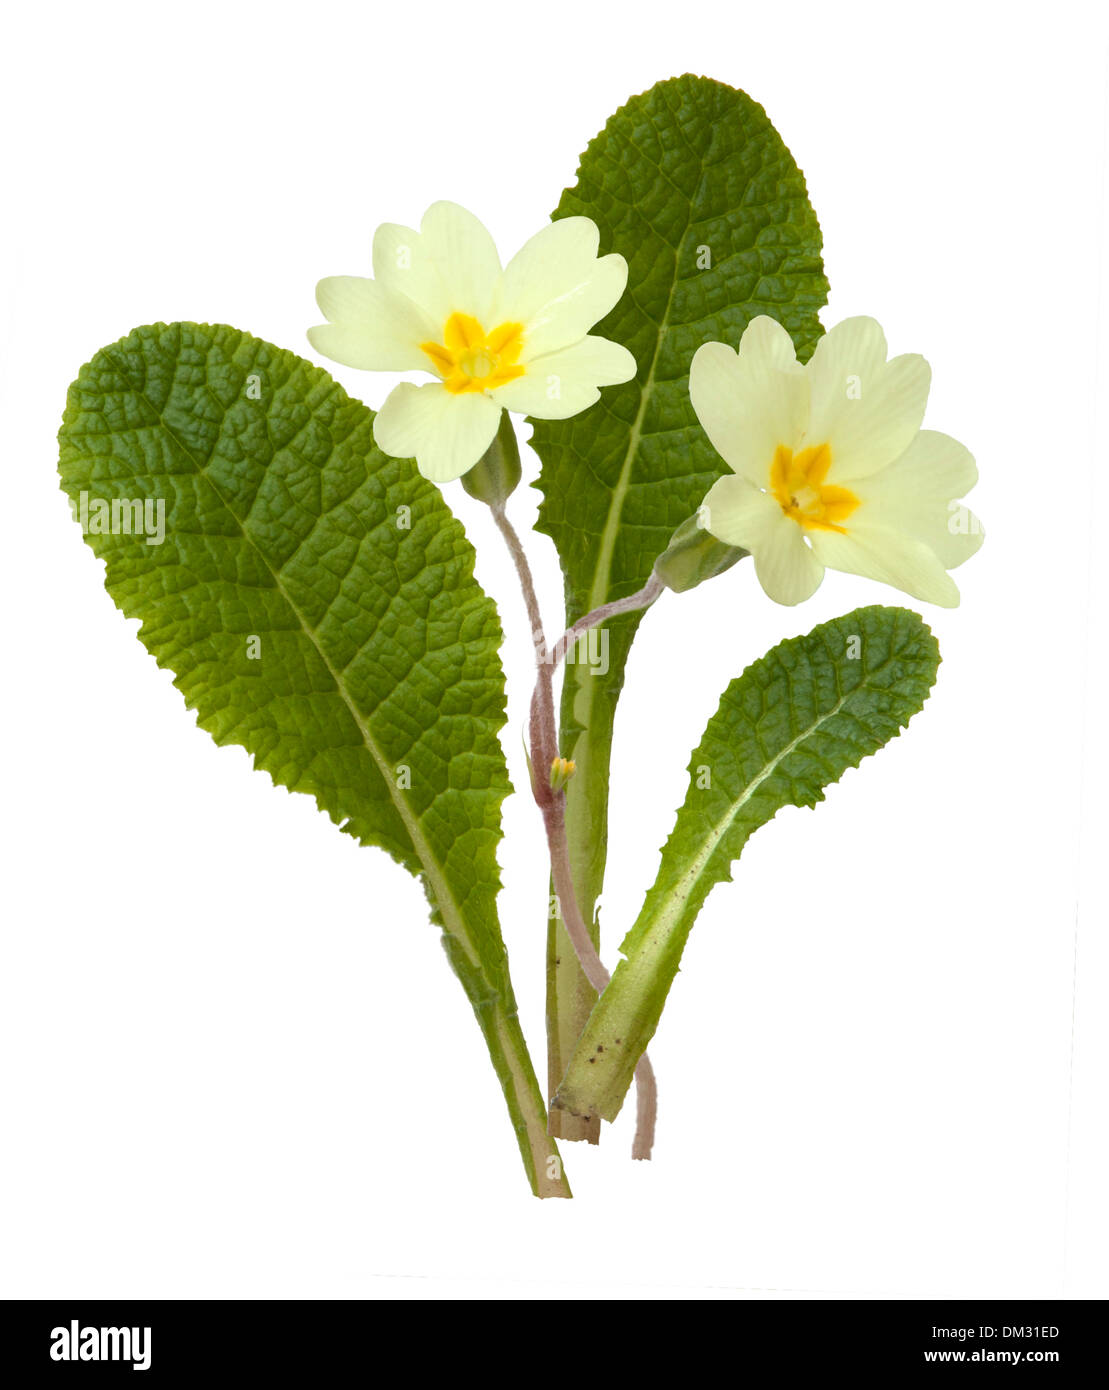 Cut-out Primrose plant on white background. Stock Photo